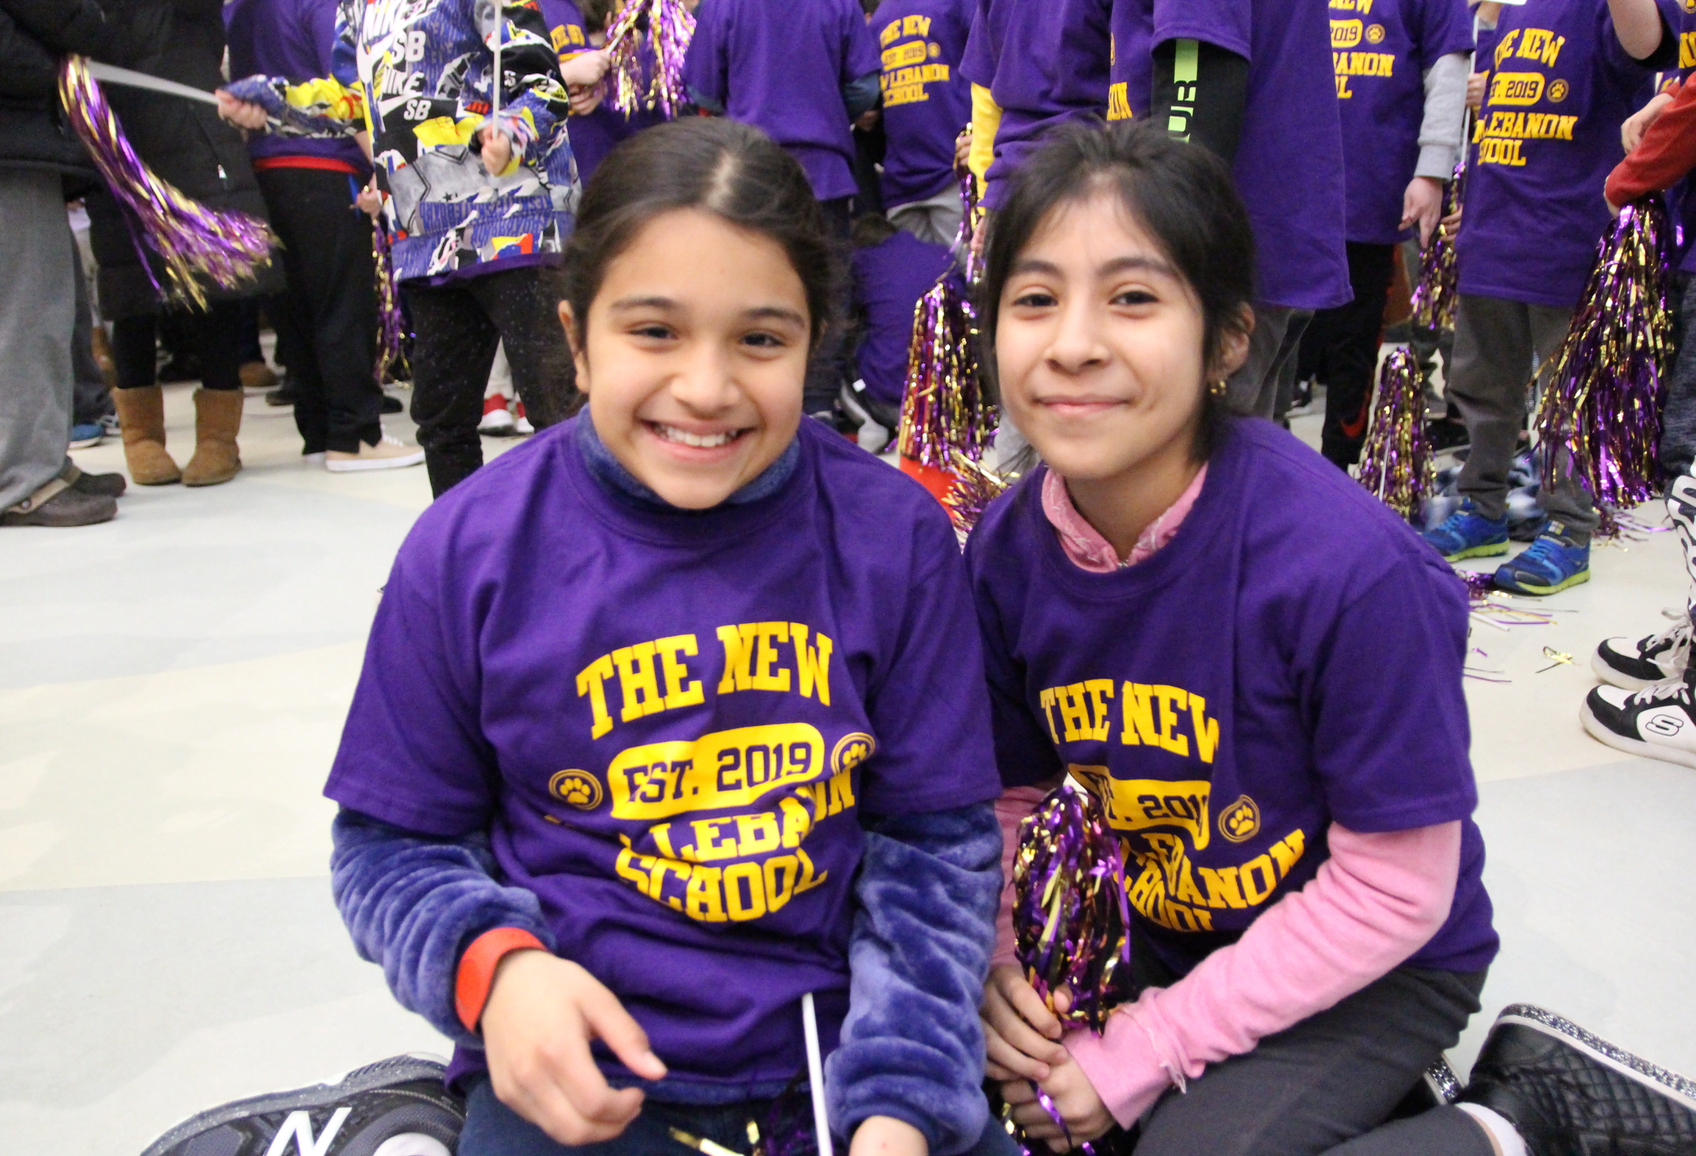 Students and staff were all in new purple and gold t-shirts and coordinating pom poms to celebrate the opening of the new New Lebanon School. Feb 20, 2019 Photo: Leslie Yager